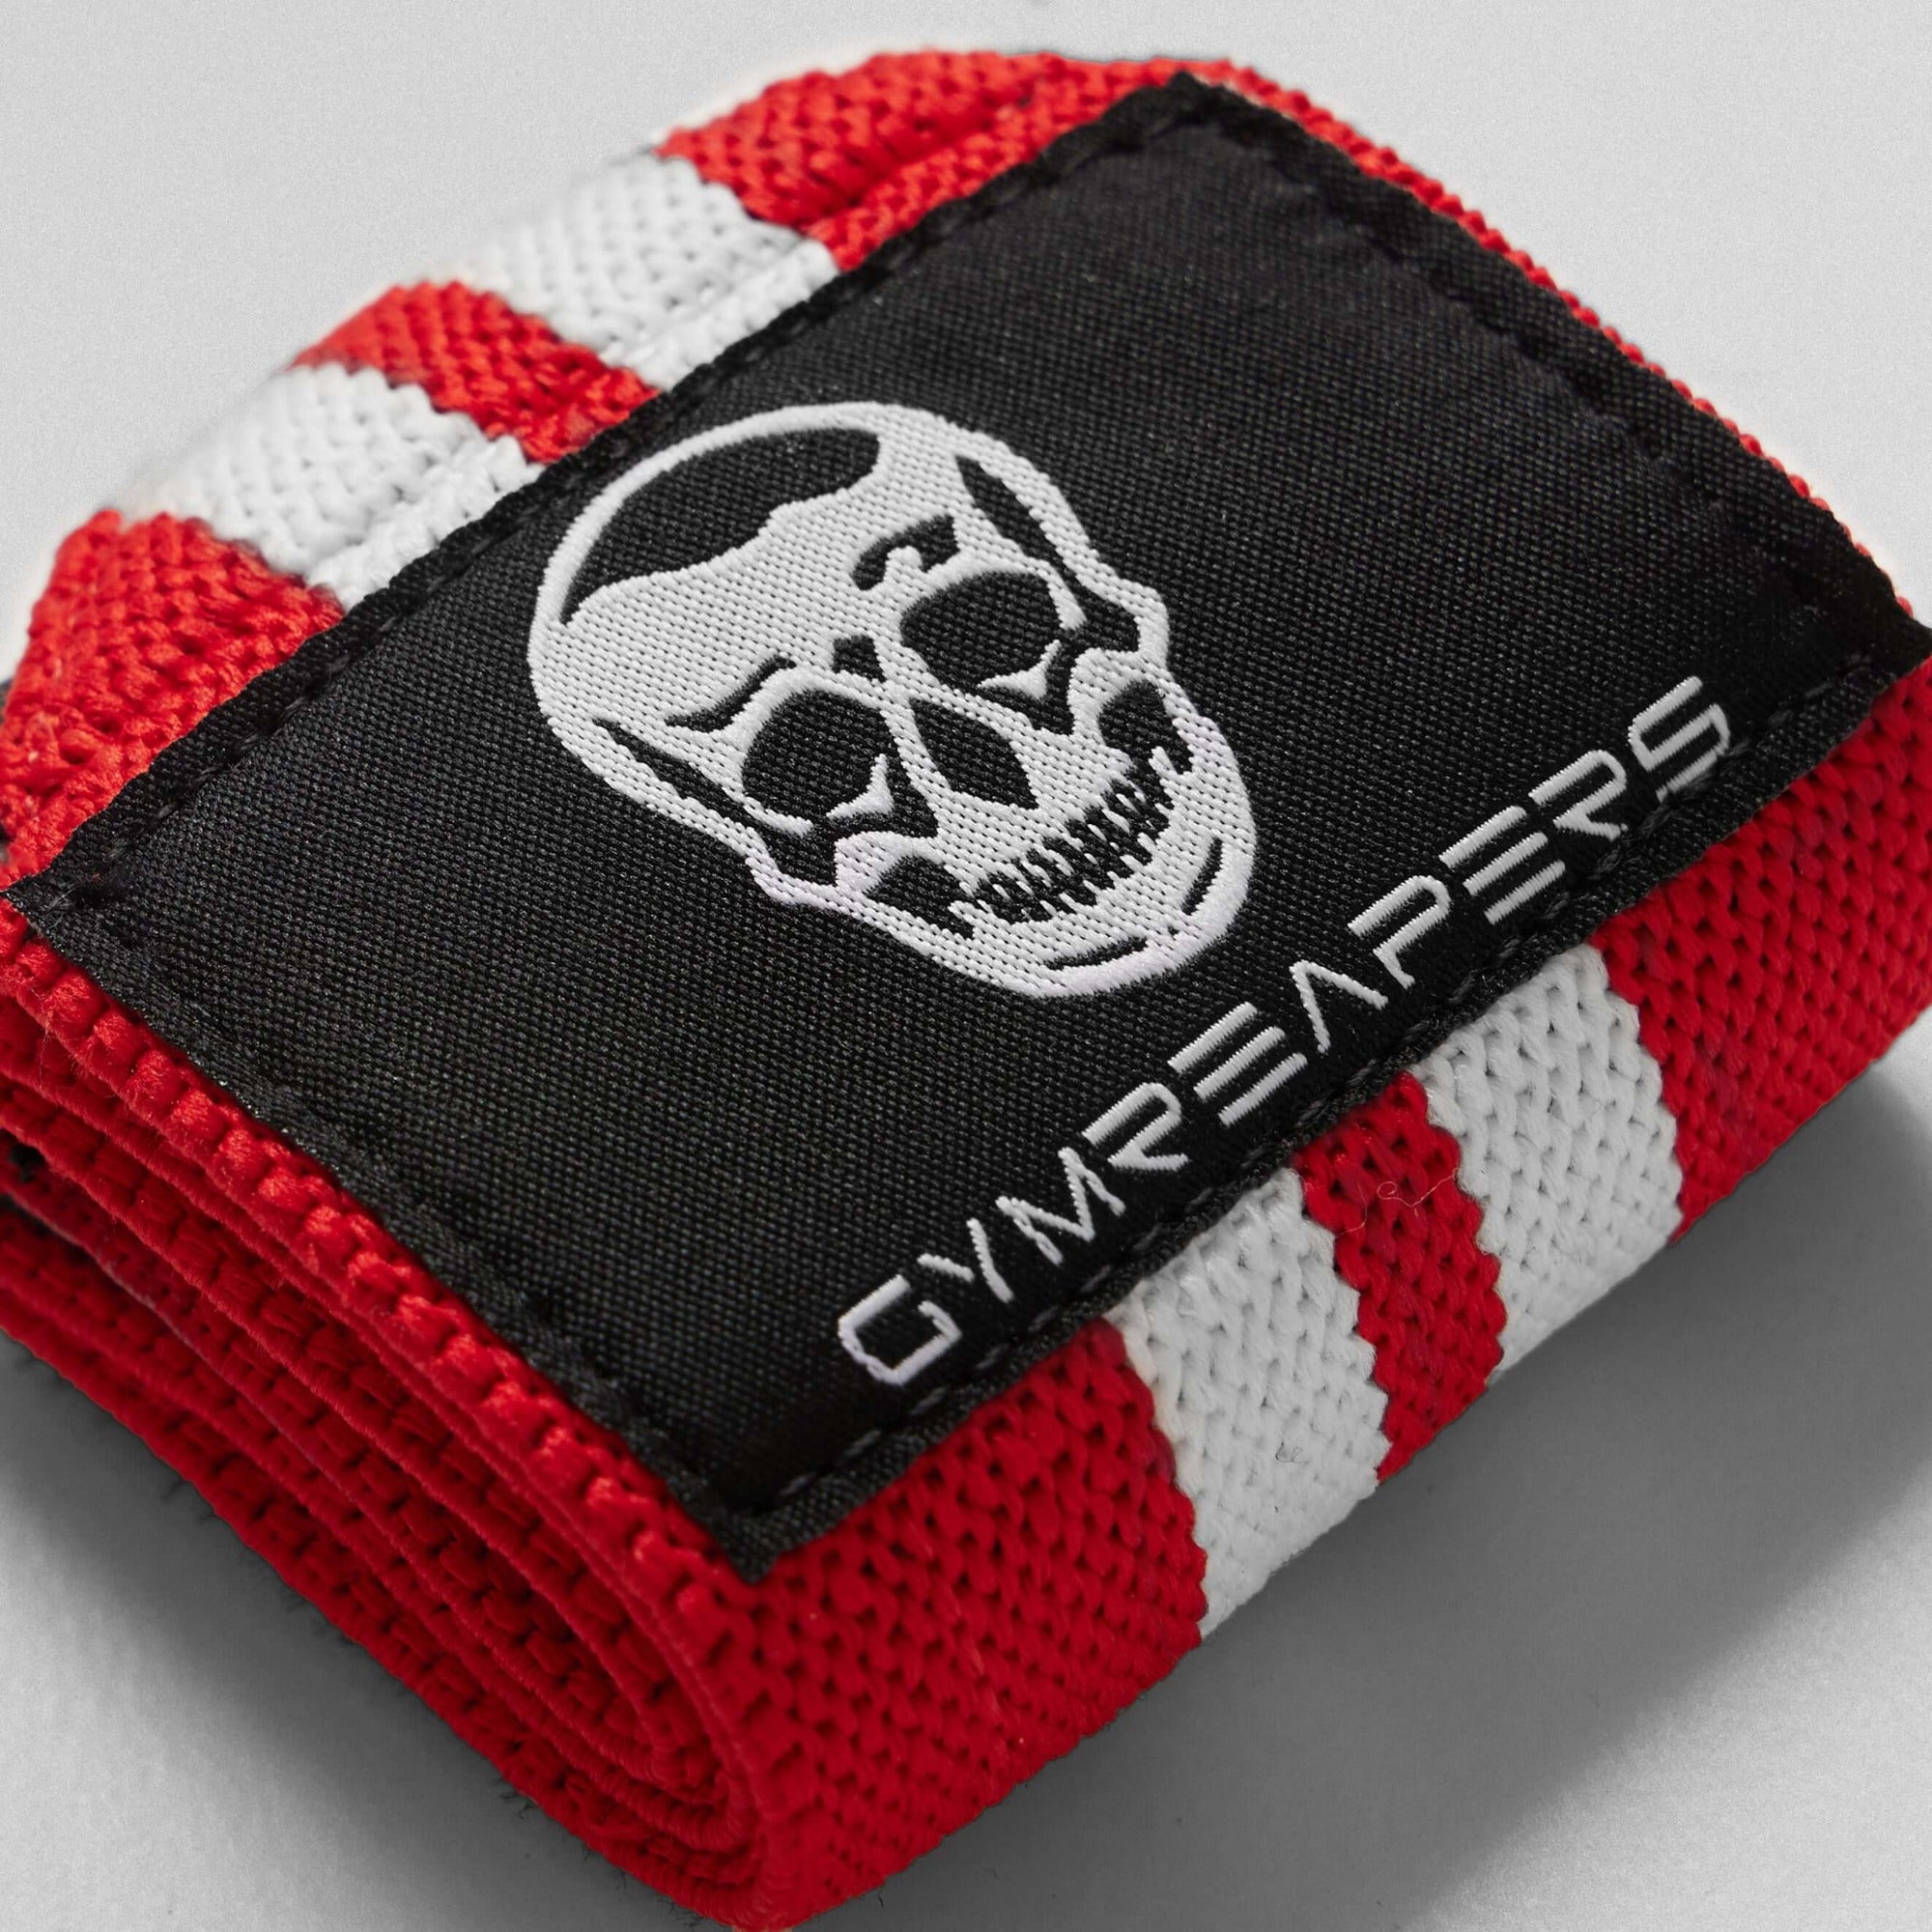 Wrist Wraps - 18 Weightlifting Wrist Support - Red/White